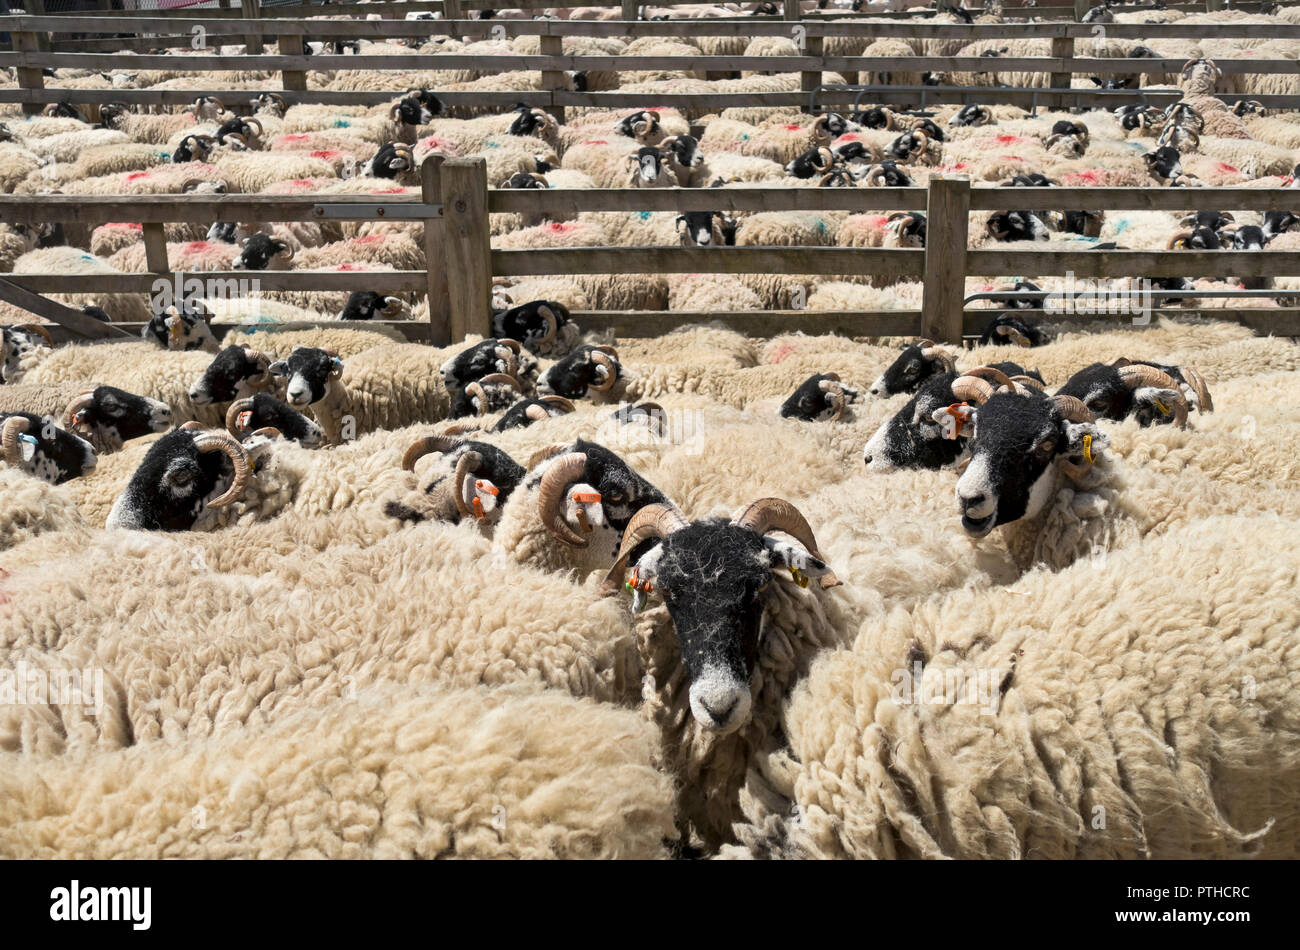 Pens of sheep awaiting shearing at the Great Yorkshire Show in summer Harrogate North Yorkshire England UK United Kingdom GB Great Britain Stock Photo